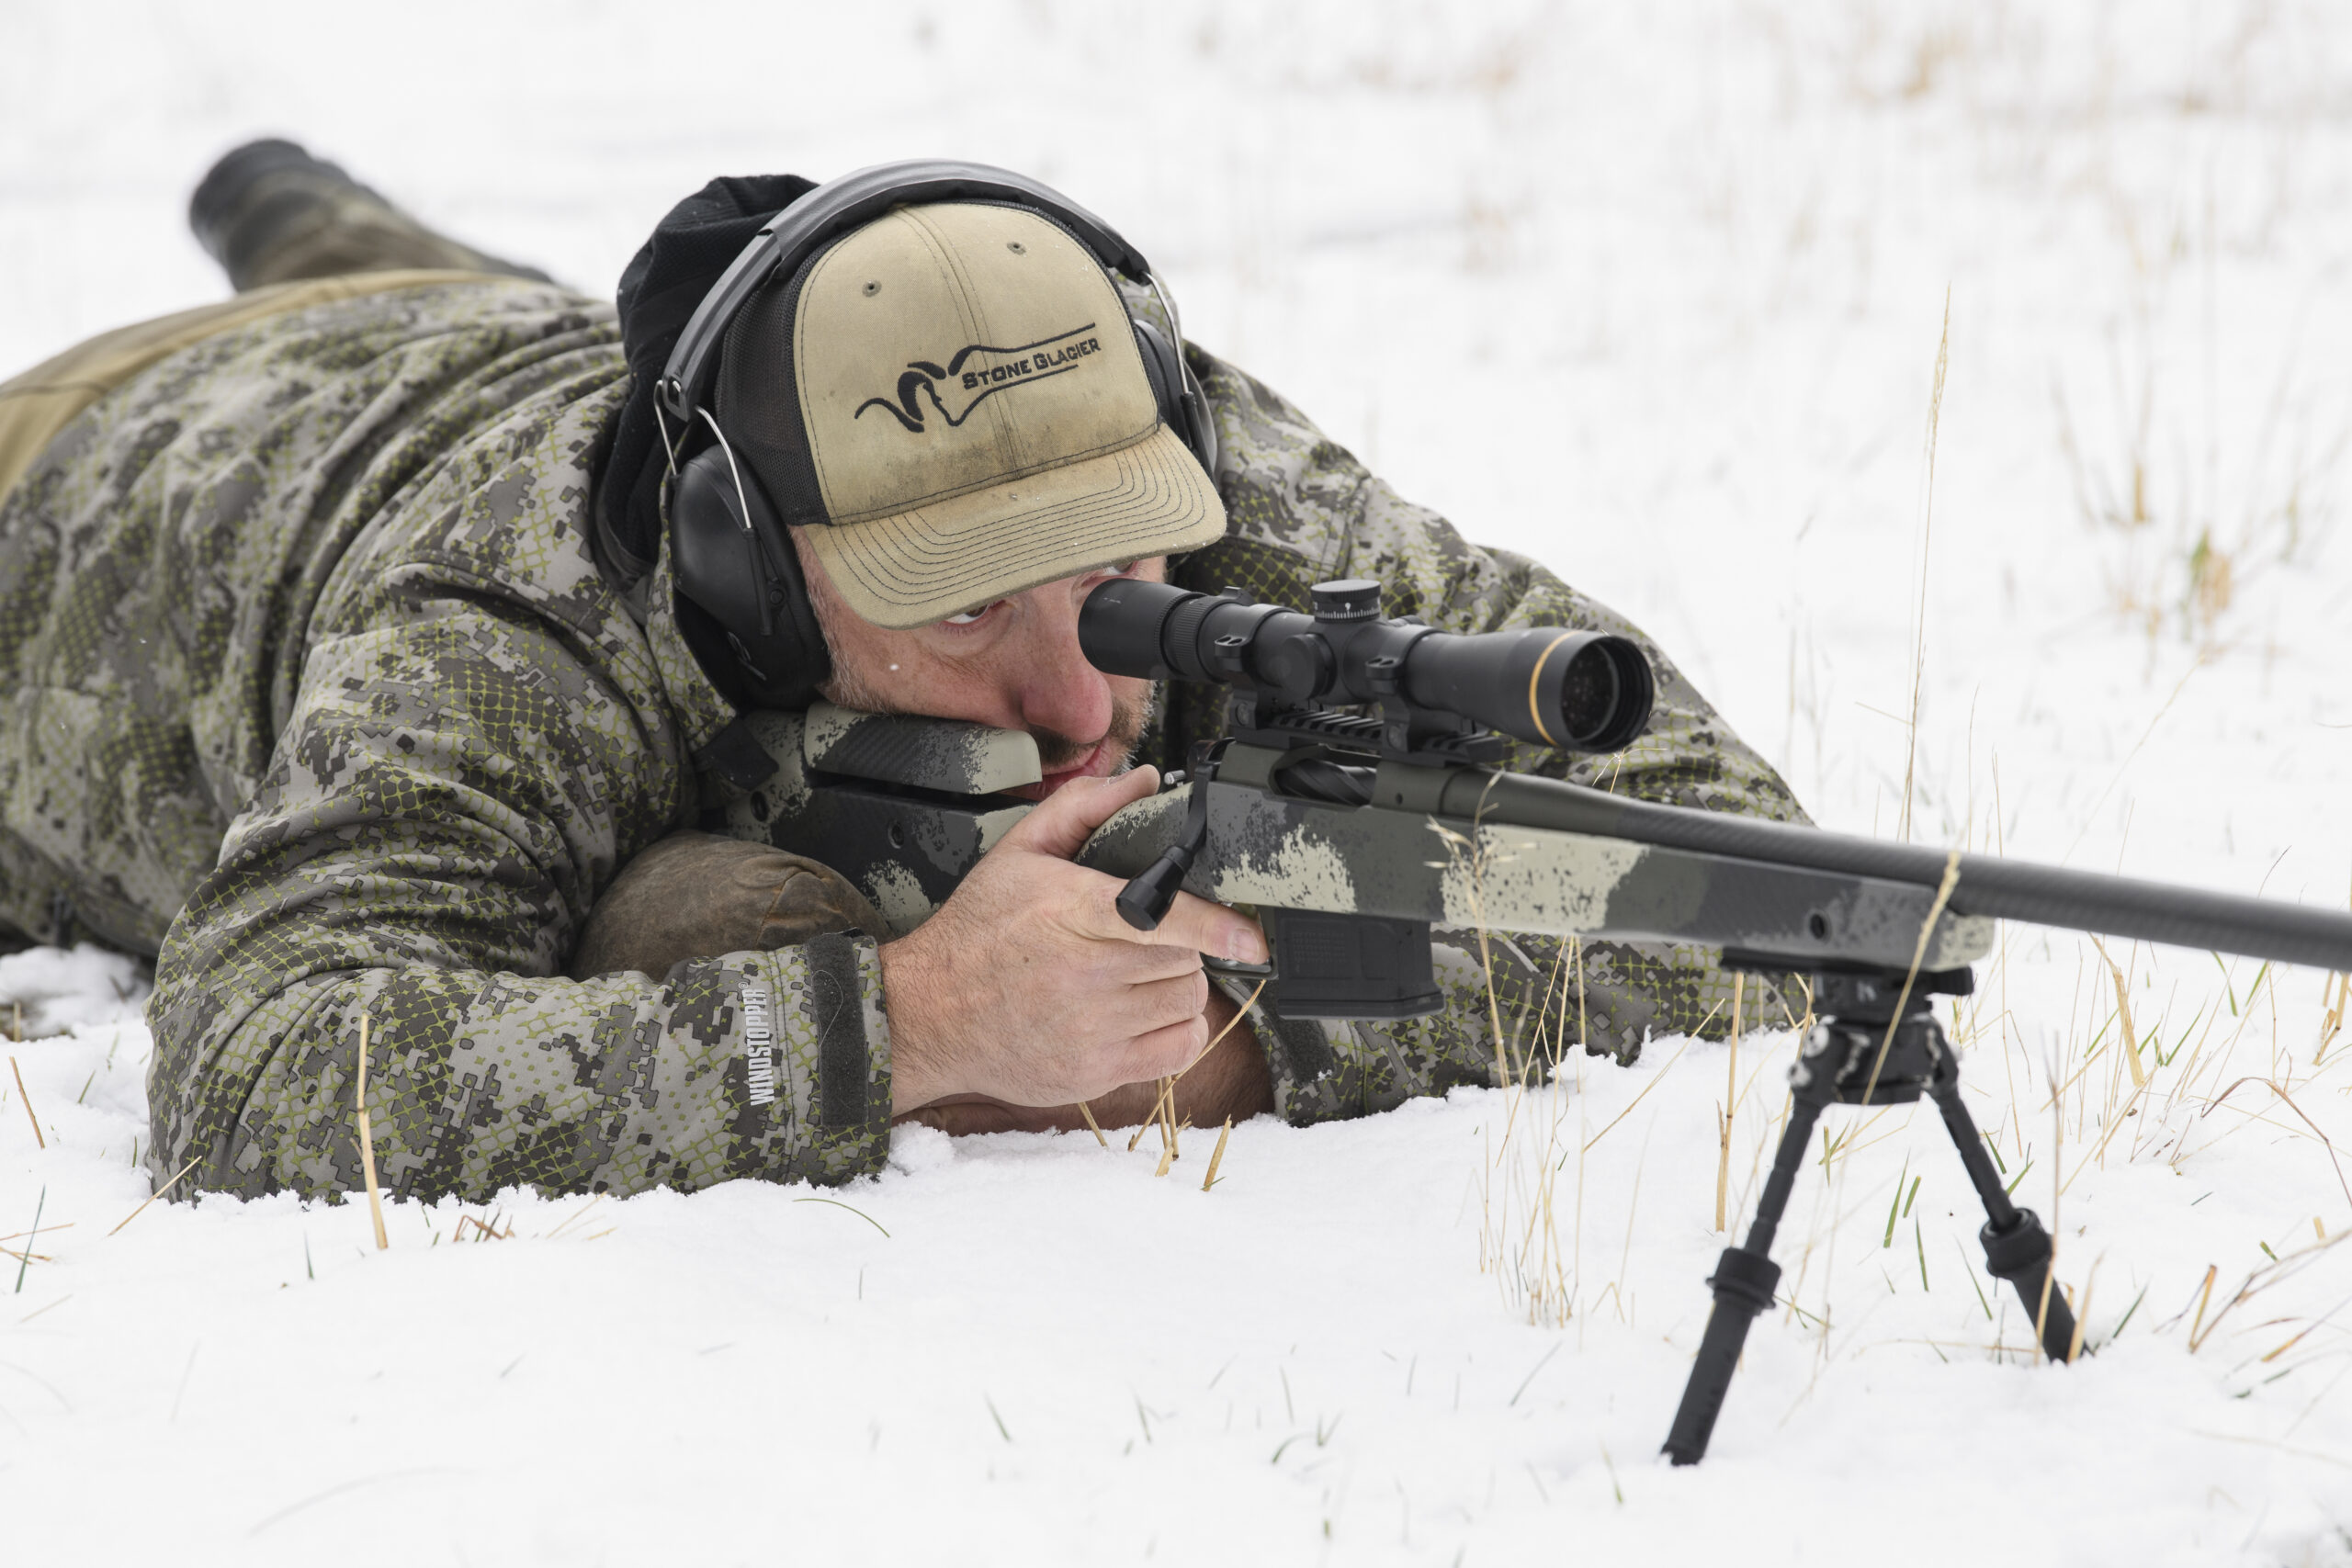 A hunter in camo and a green hat lies prone on the ground behind a Springfield Waypoint rifle, in conjunction with a bipod.